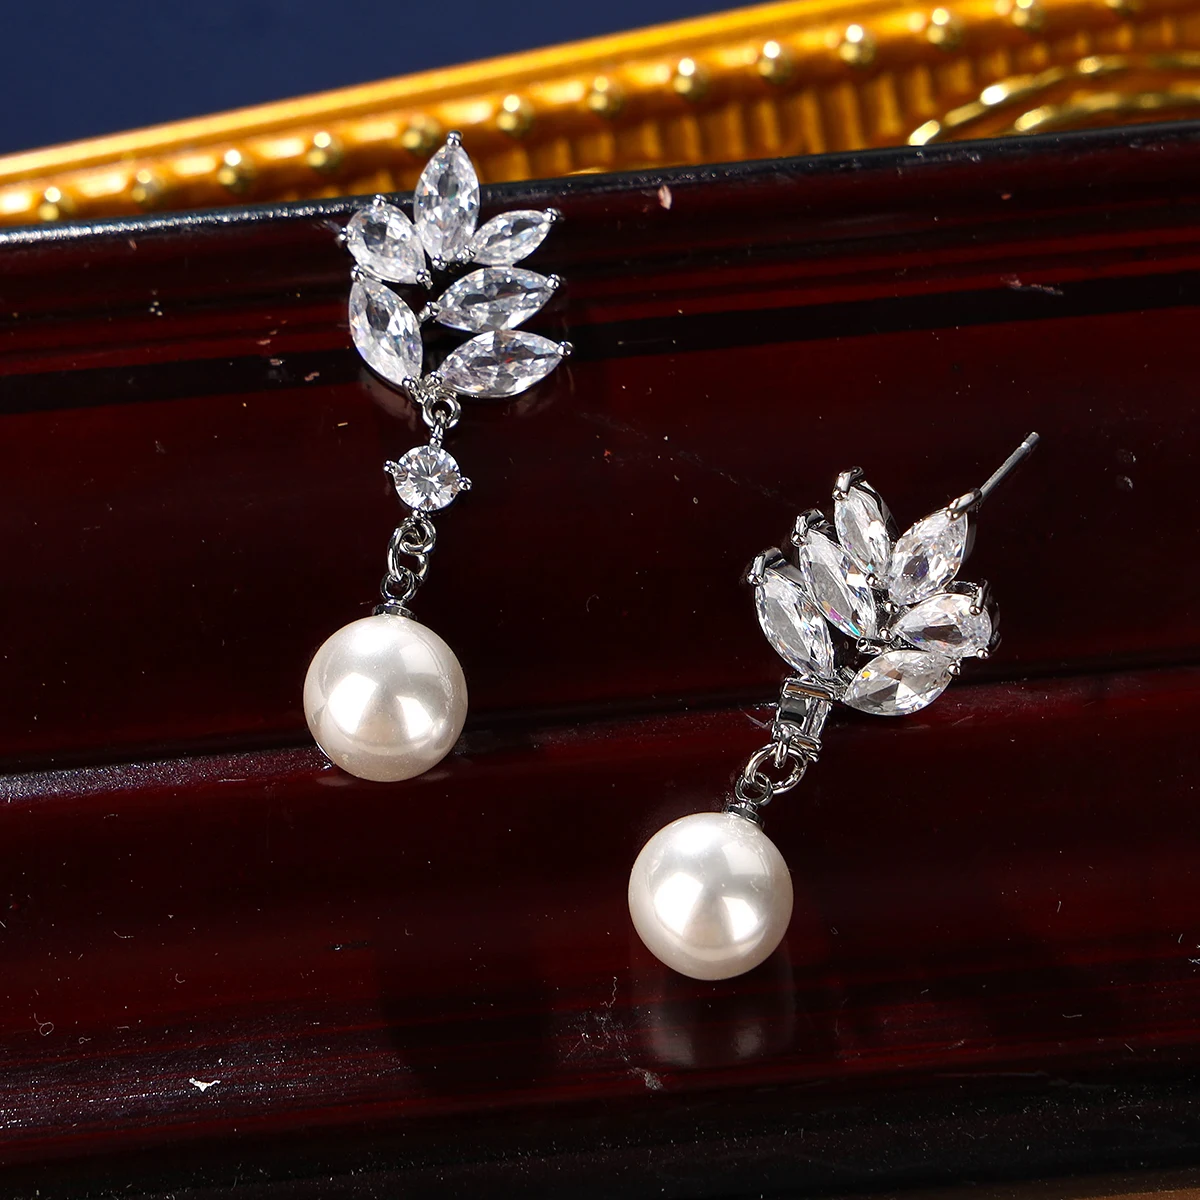 

Elegant pearl bridal wedding earrings, set with cubic zirconia crystals and white pearls,suitable for brides, bridesmaids, gifts